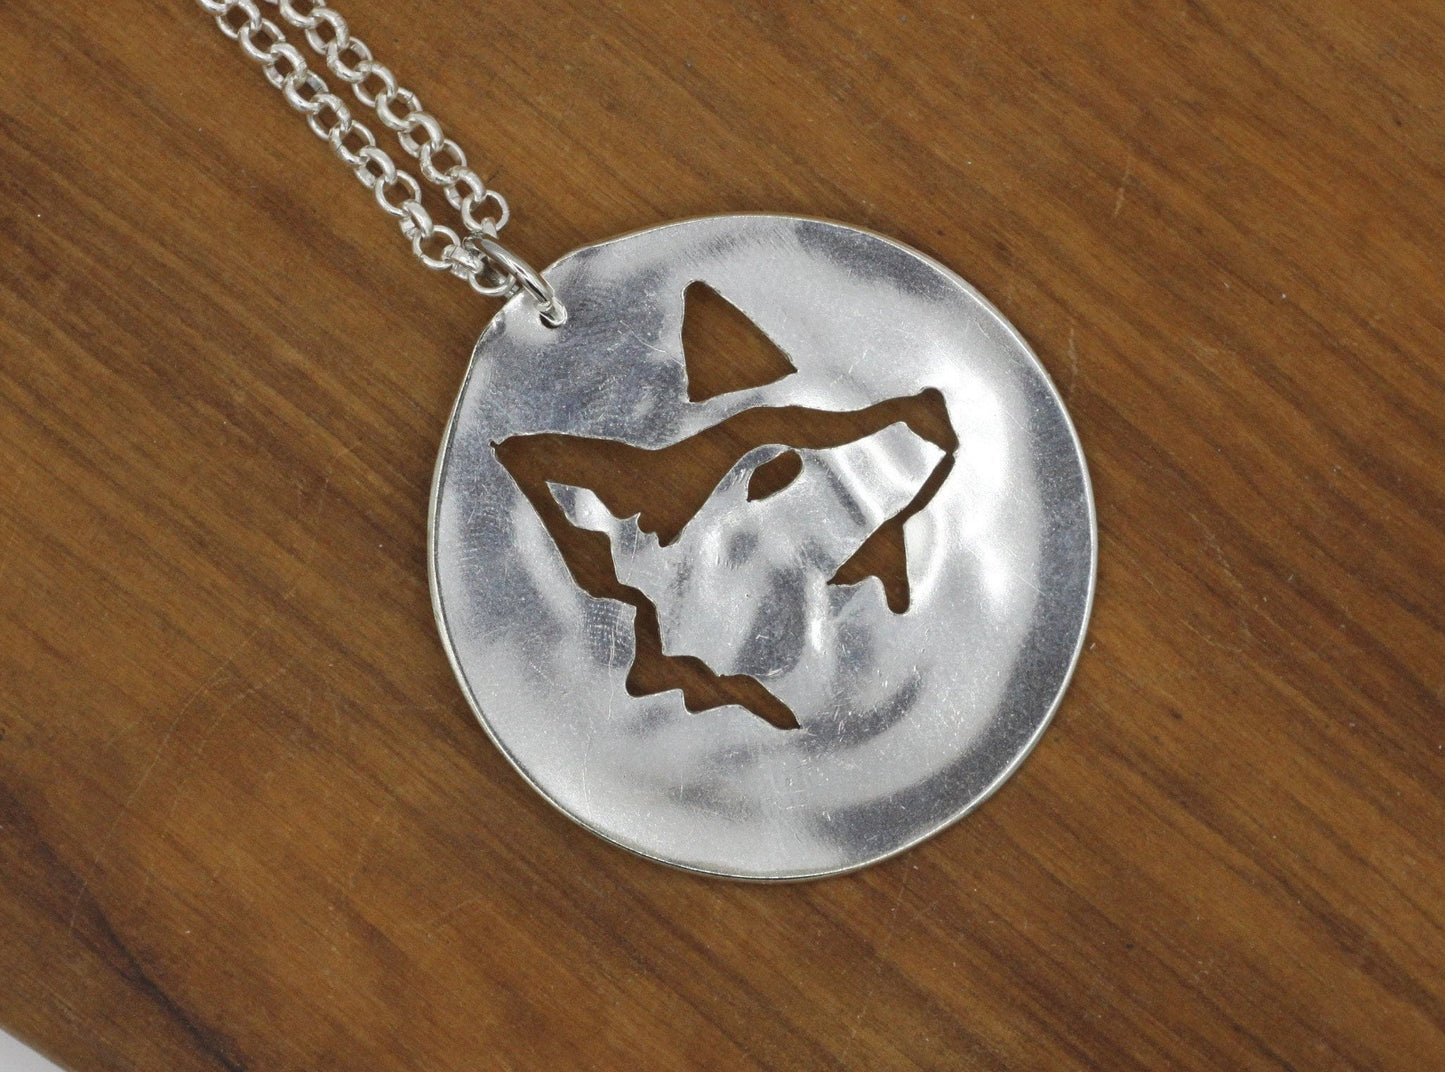 Silver Necklace with Fox, Wolf, Dog Pendant Handmade from repurposed silverware, Silverware Jewelry, Unique birthday gift for him or her.